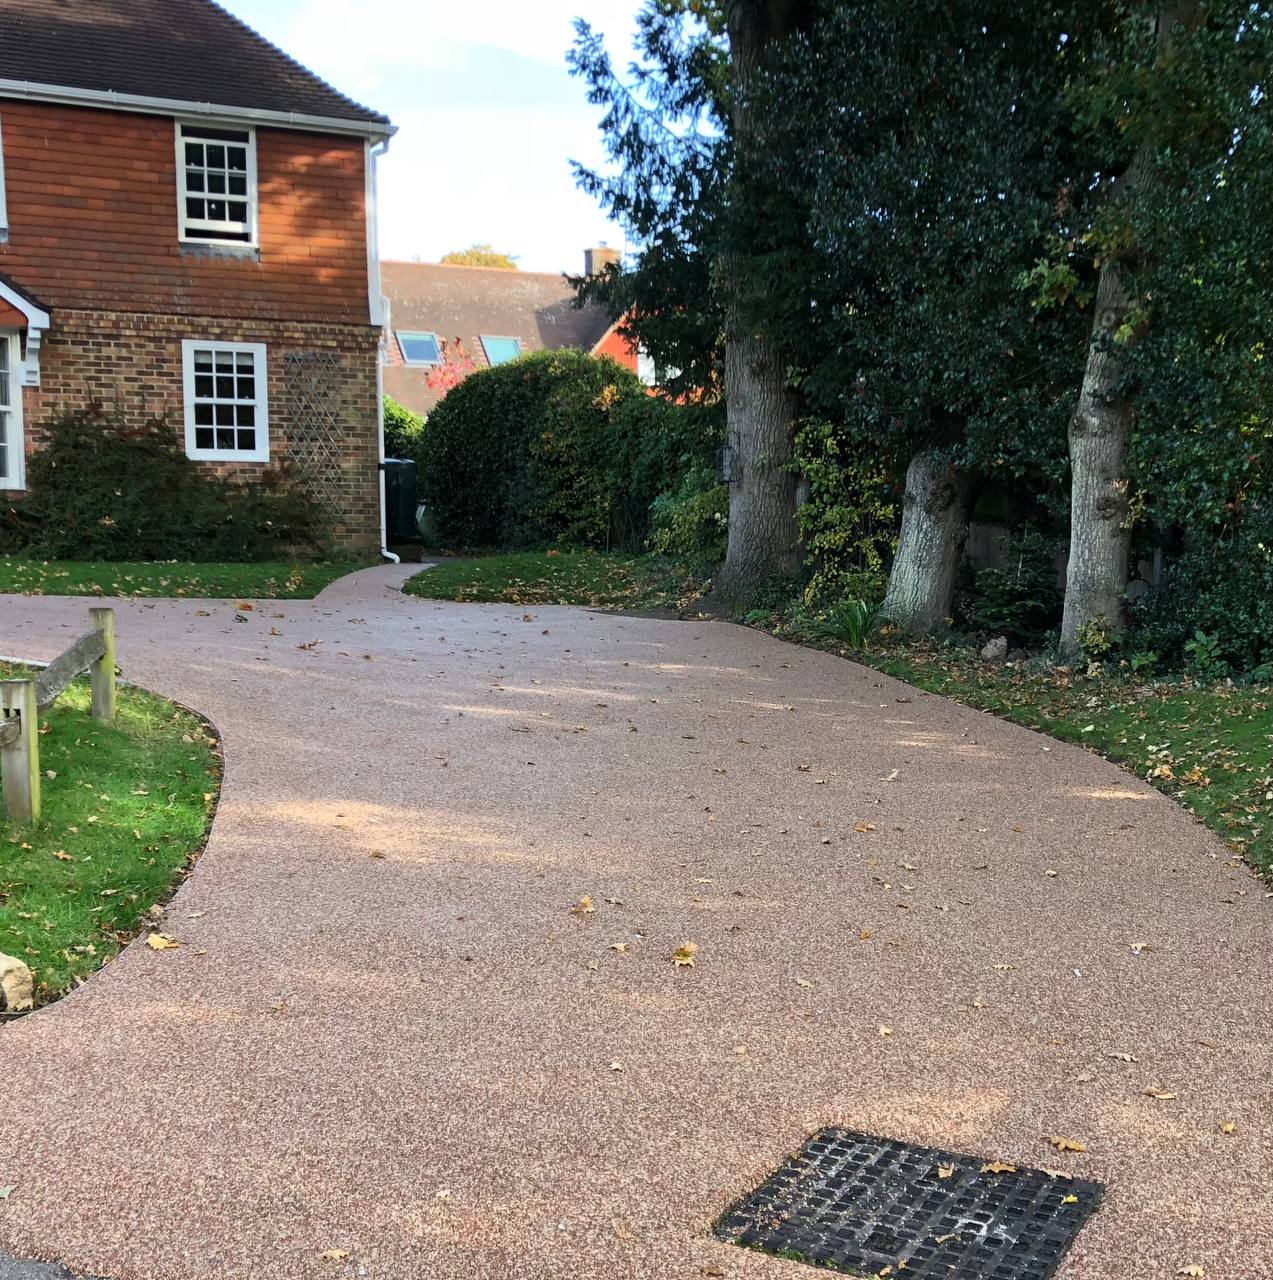 This is a photo of a Resin bound driveway carried out in a district of Preston. All works done by Preston Resin Driveways